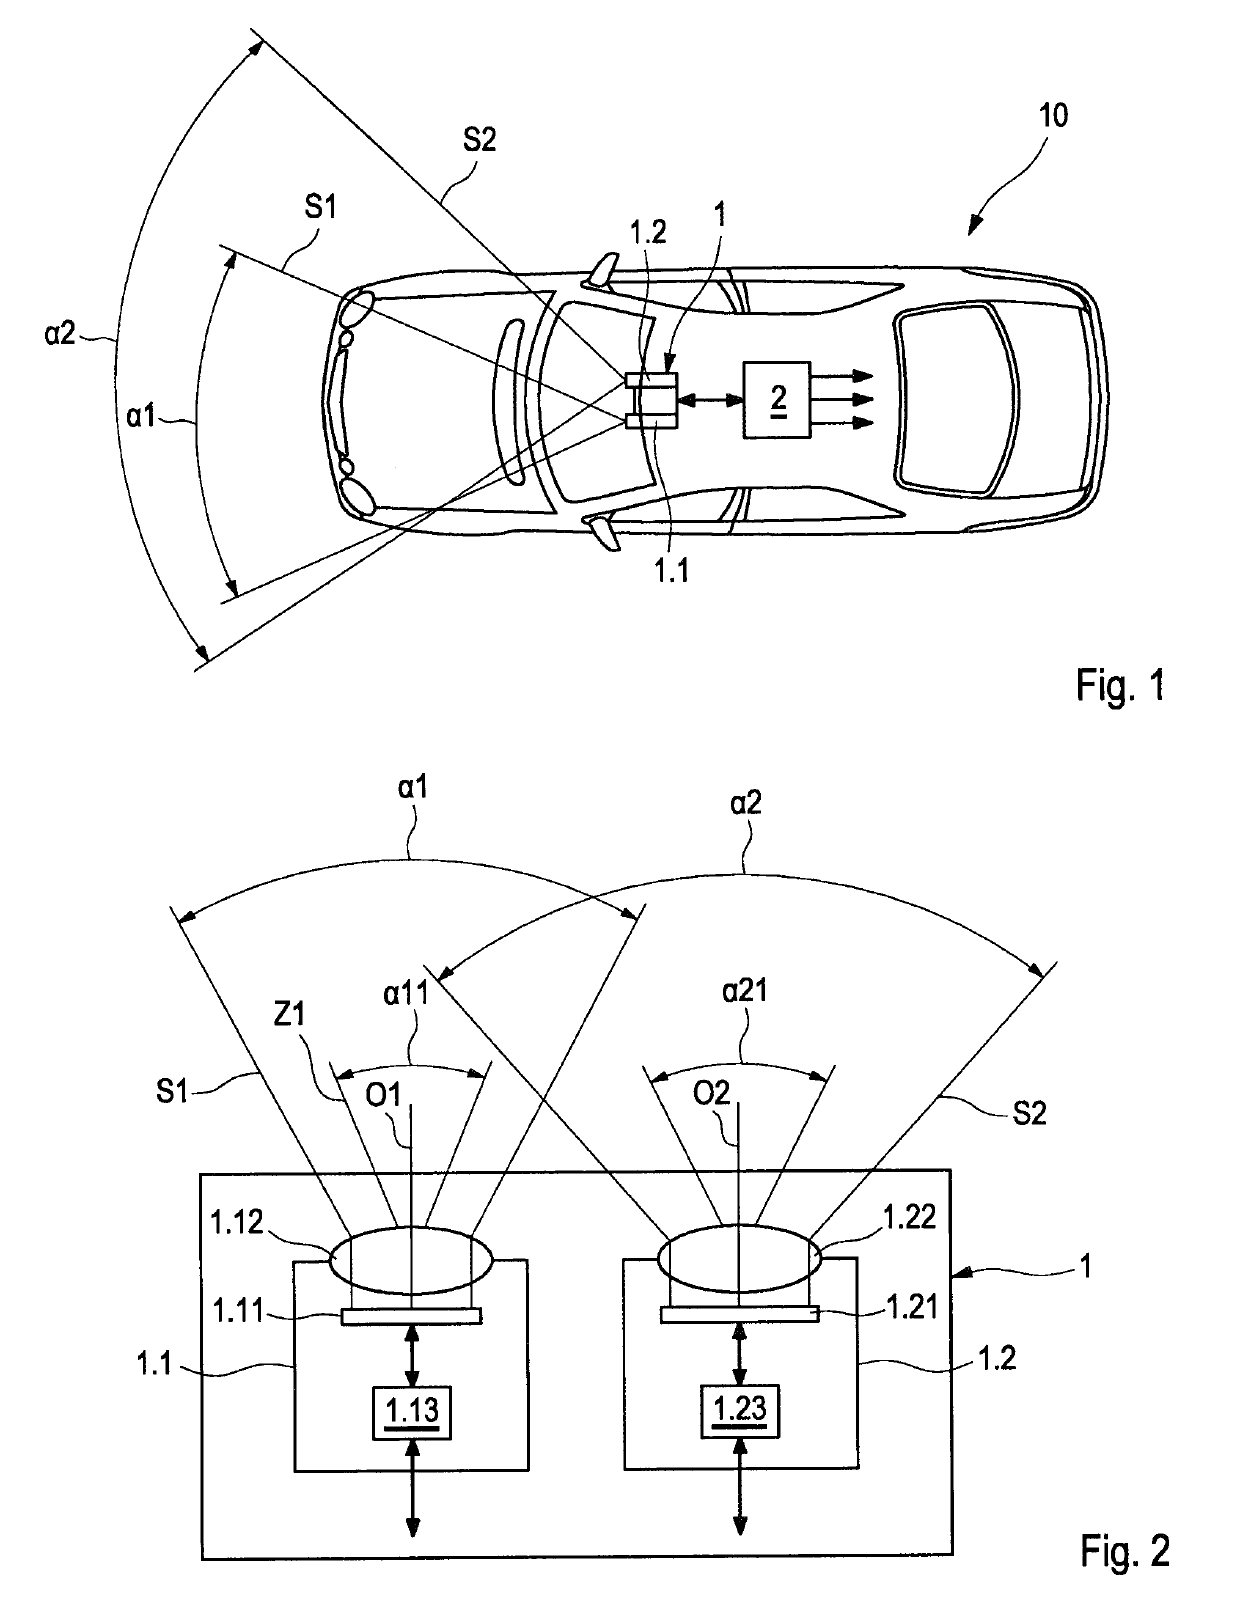 Stereo camera for vehicles